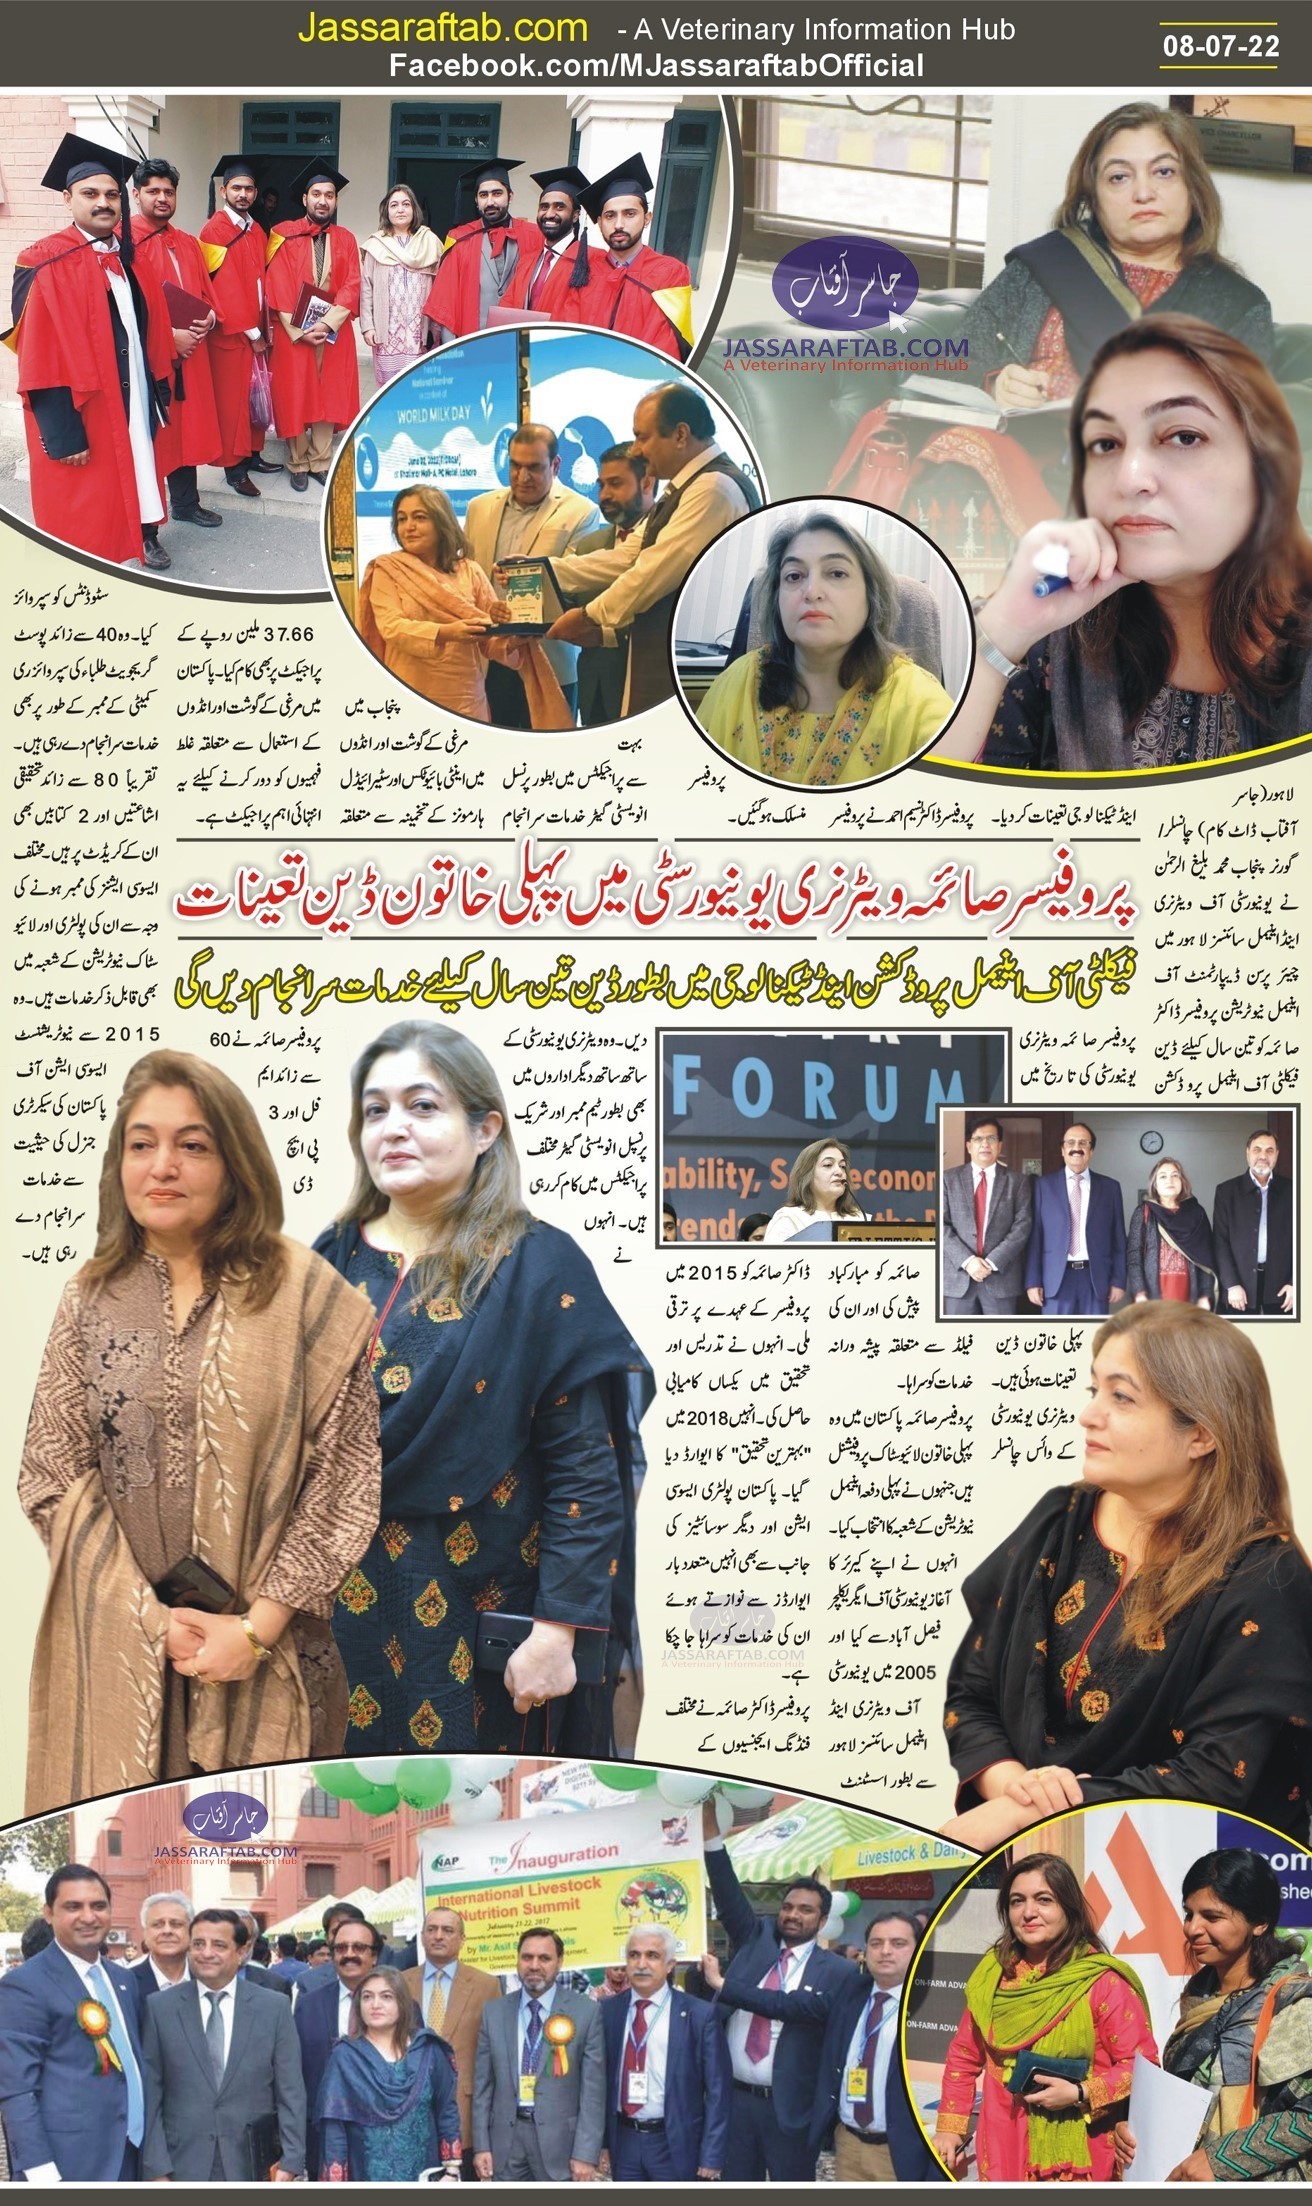 Prof. Dr. Saima honored to be the first female Dean at UVAS